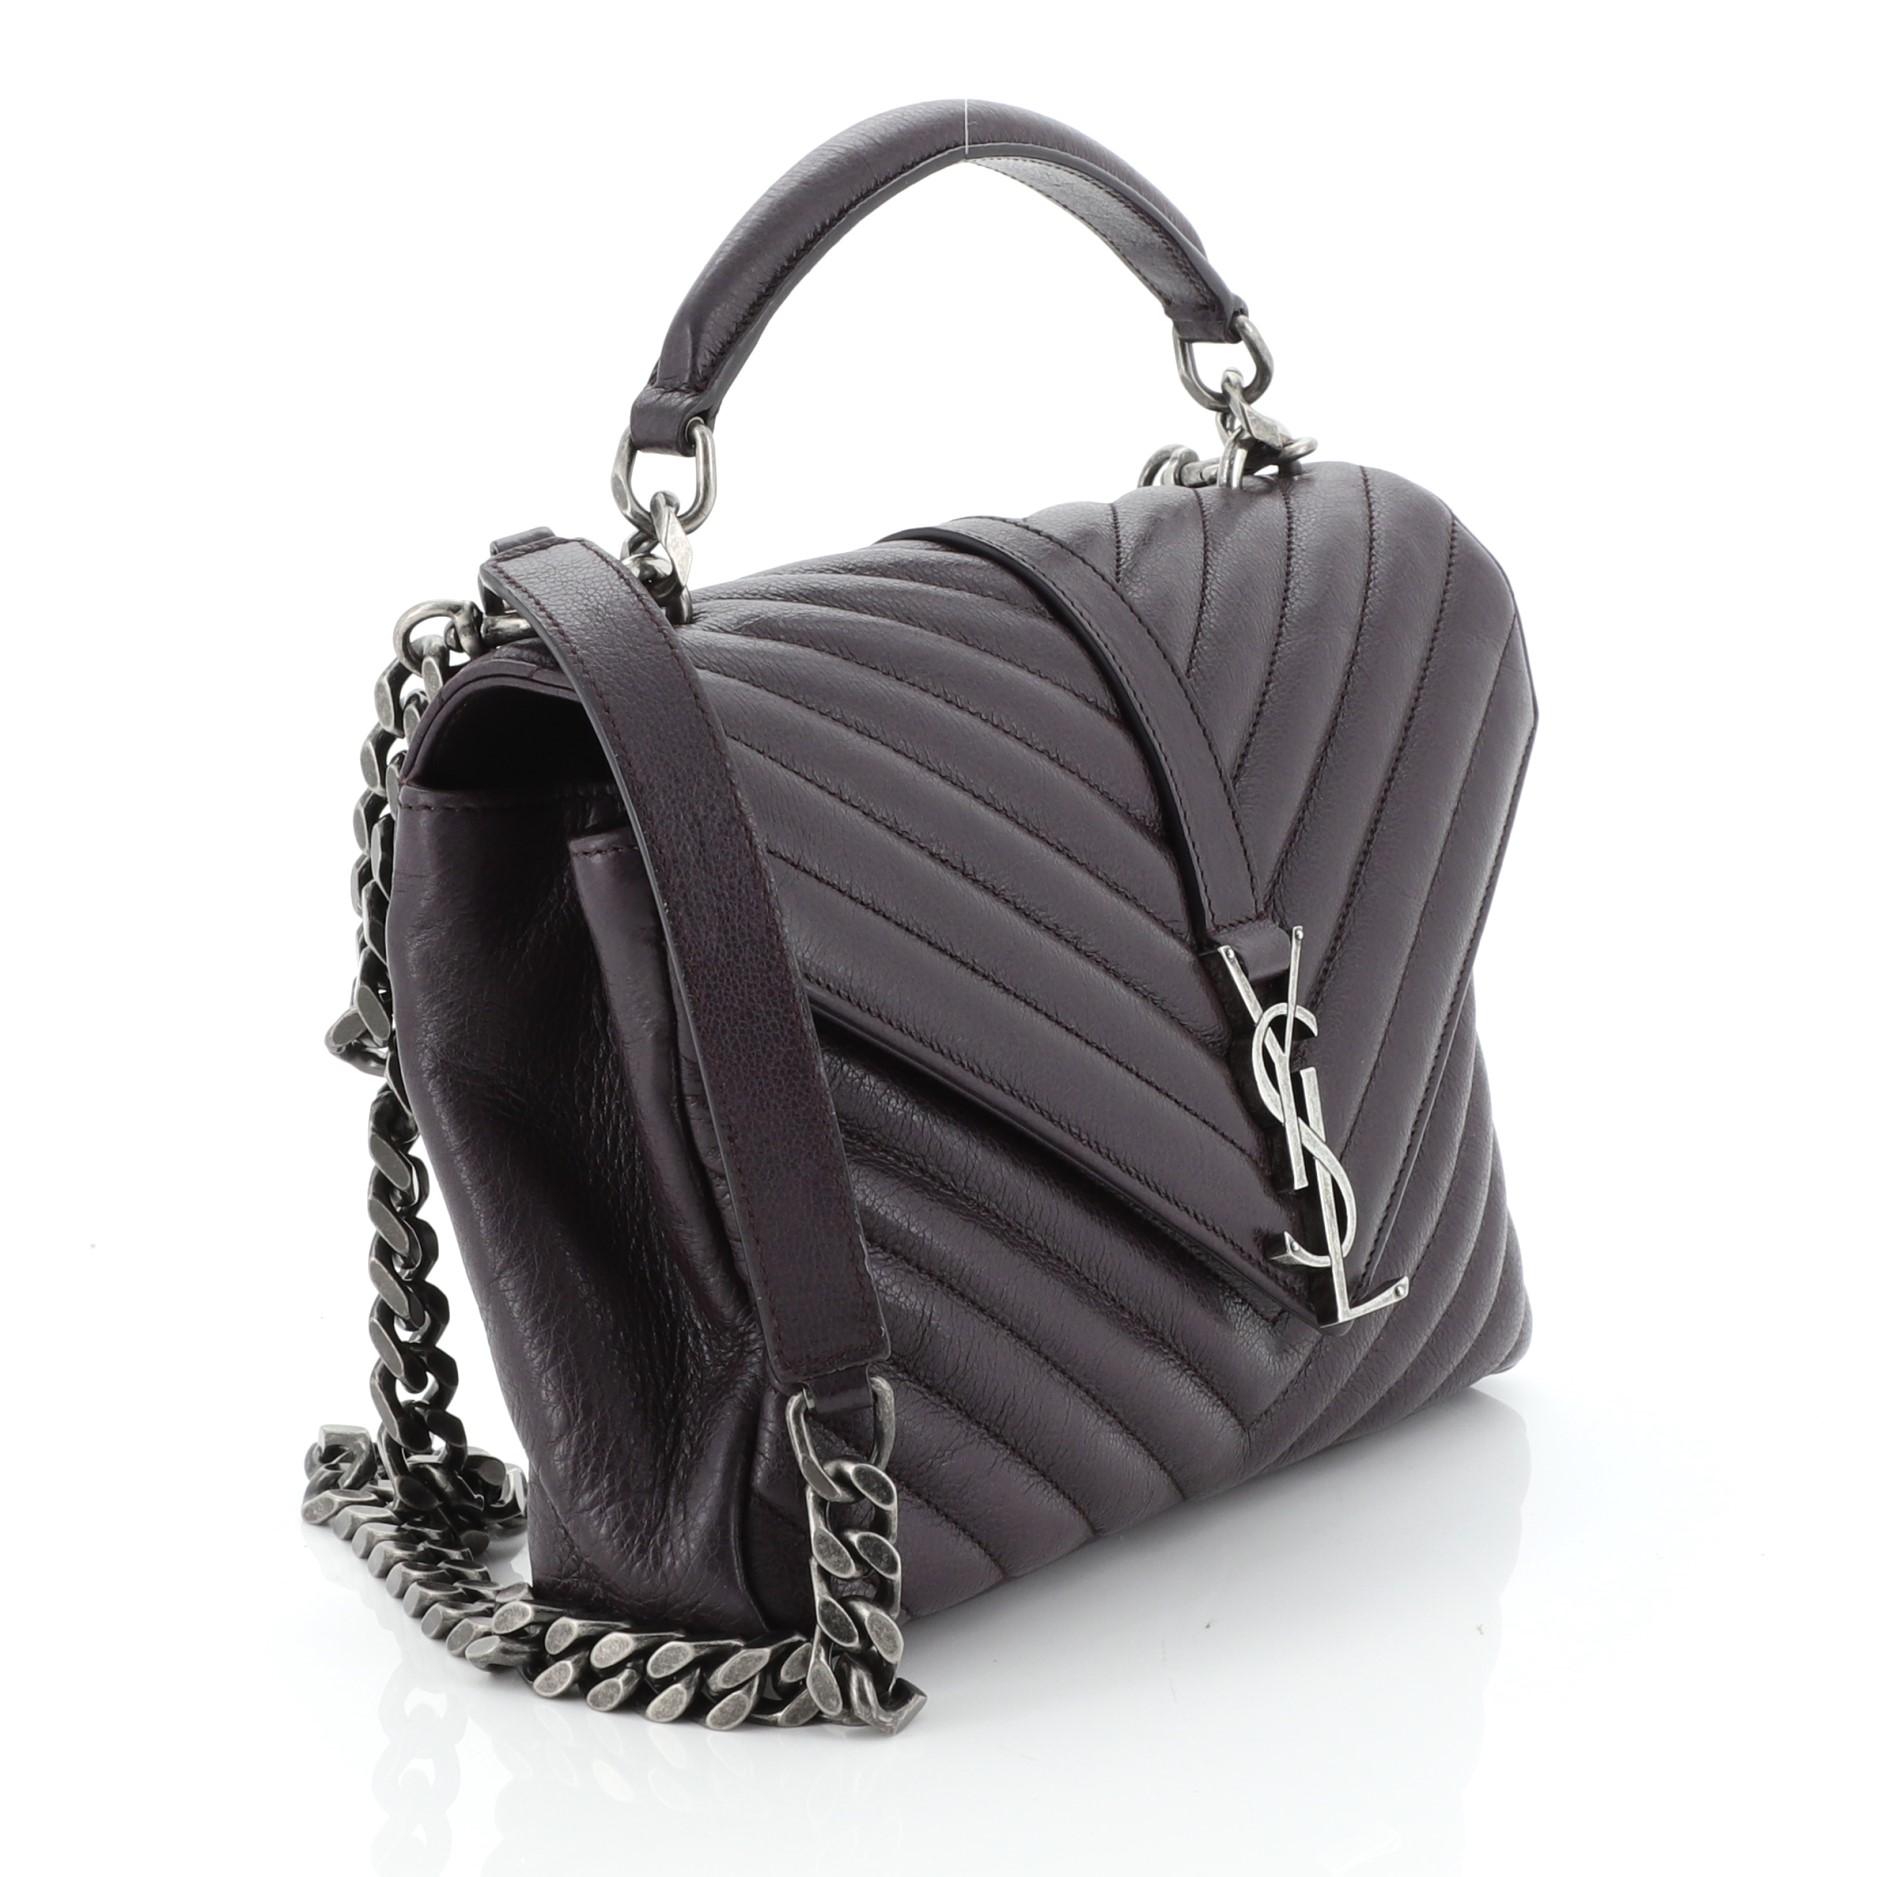 This Saint Laurent Classic Monogram College Bag Matelasse Chevron Leather Medium, crafted in purple matelasse chevron leather, features a single top handle, exterior back pocket, and aged silver-tone hardware. Its magnetic snap closure opens to a